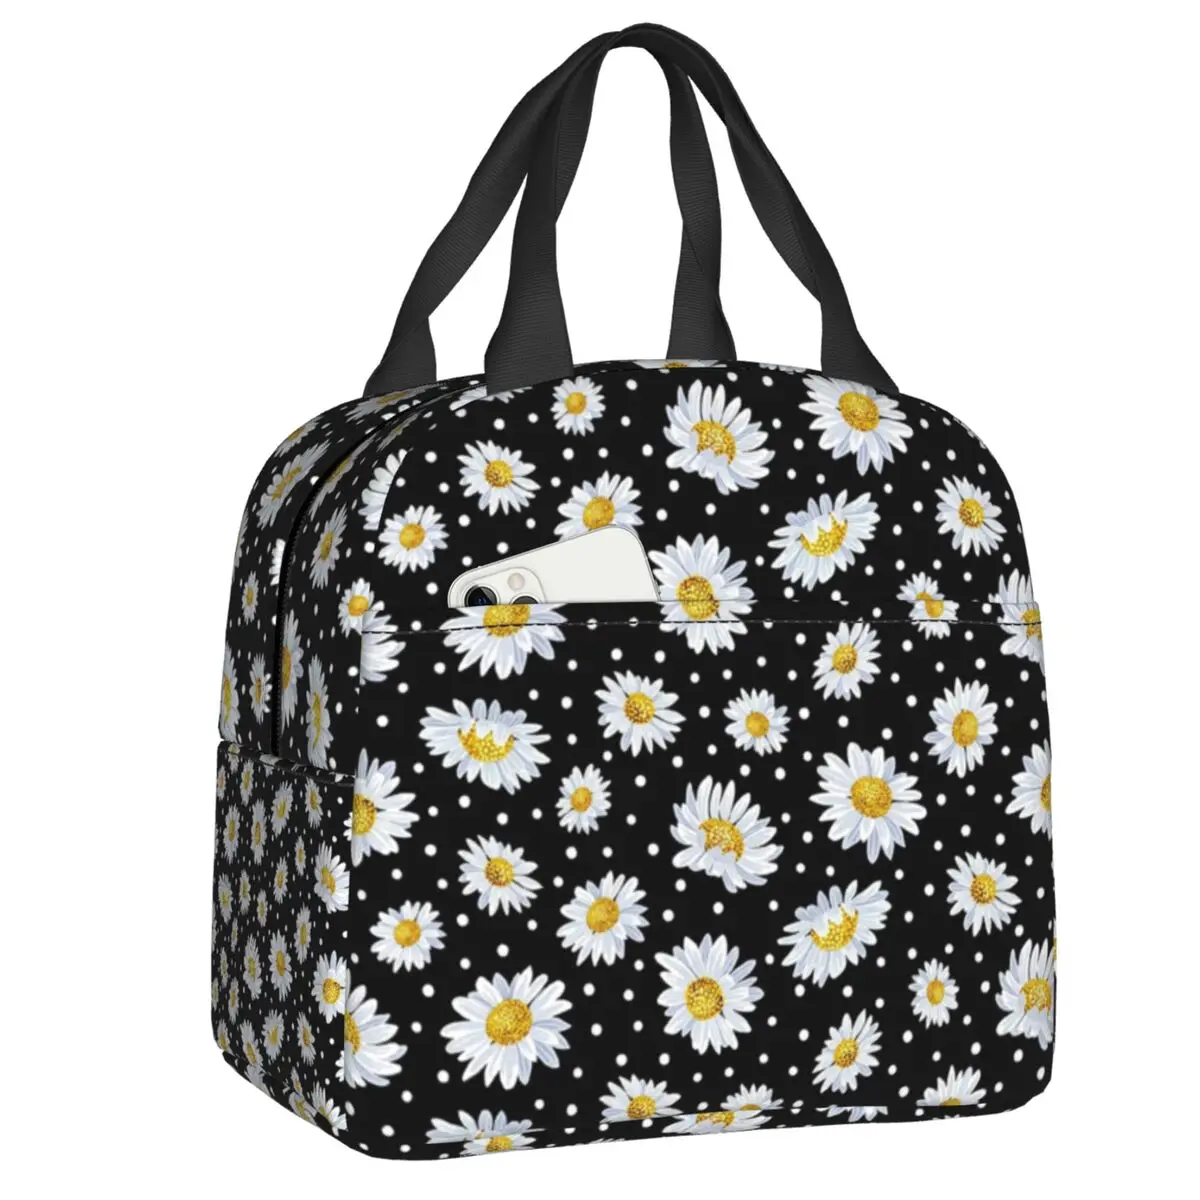 

Sunshine Floral Daisy Flower Lunch Bag Men Women Thermal Cooler Insulated Lunch Box for Kids School Work Food Picnic Tote Bags